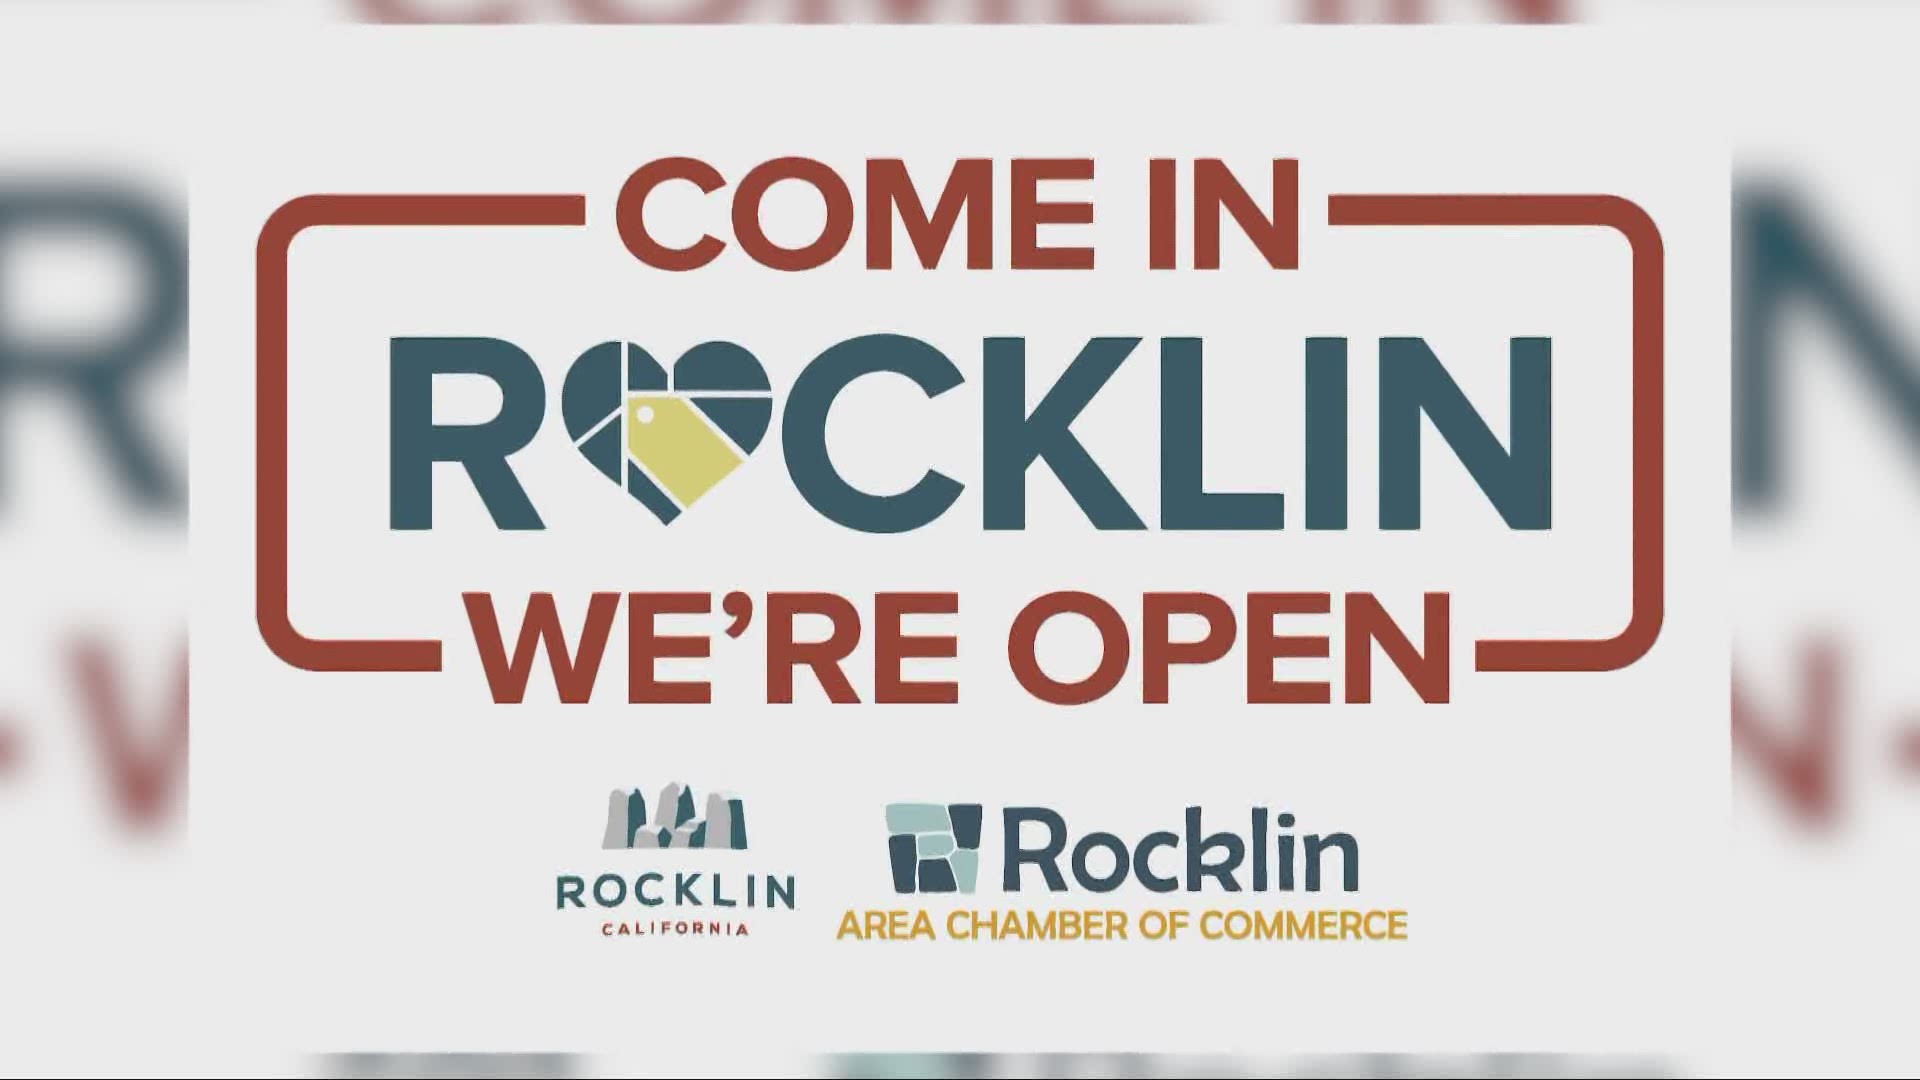 The city of Rocklin is encouraging people to shop and dine locally with a new campaign called 'Come in Rocklin, we’re open!'